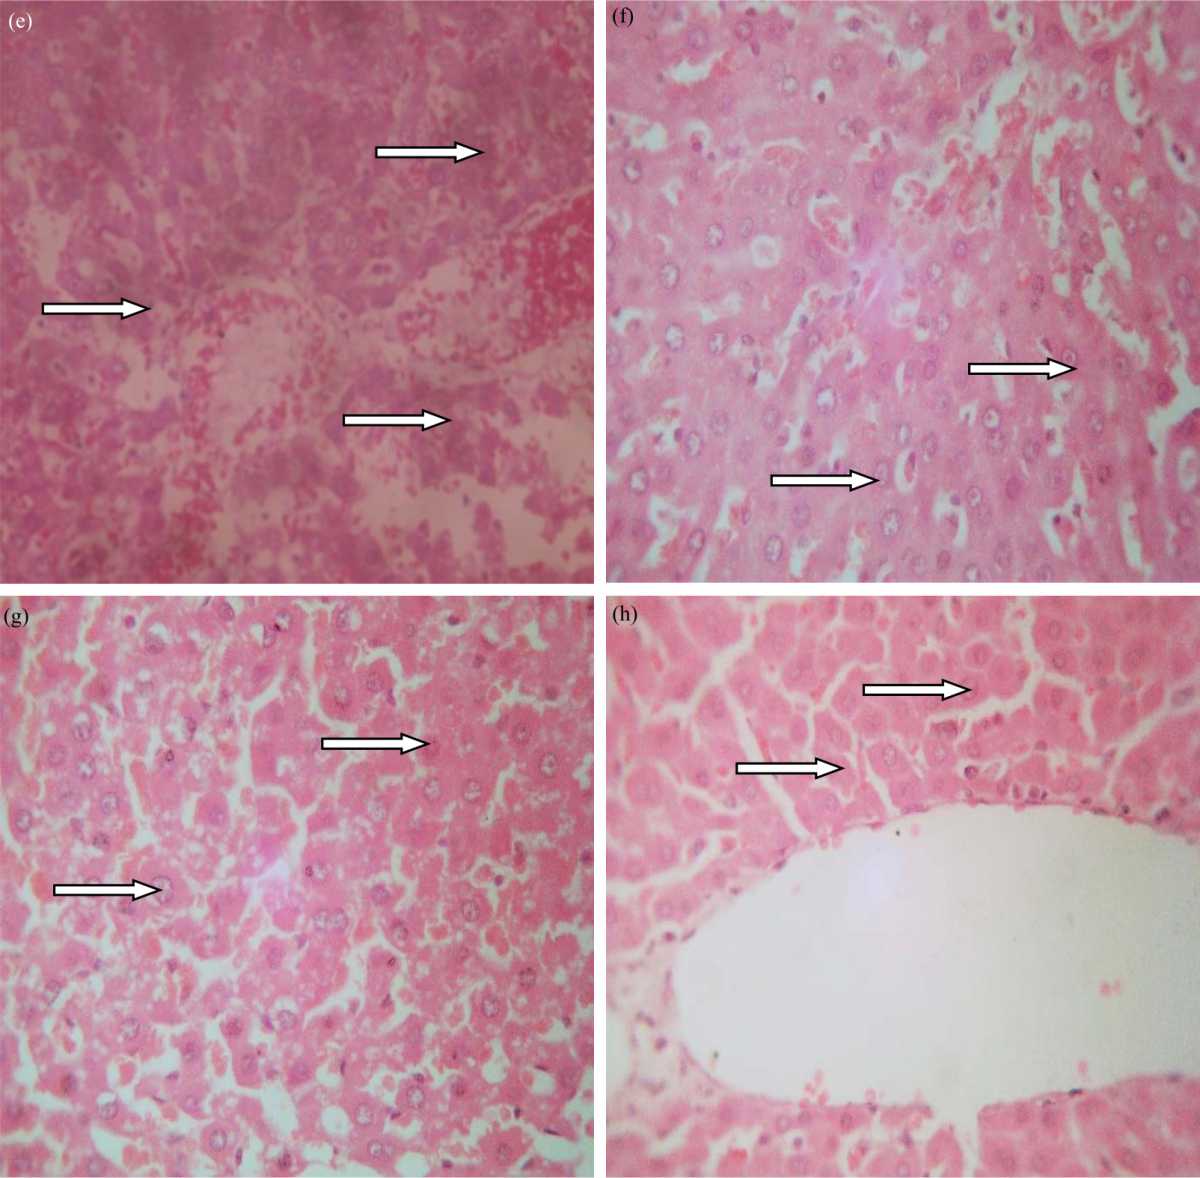 Image for - Ethanolic Leaf Extract of Ocimum gratissimum Abrogates Methotrexate-induced Liver Injury in Albino Rats